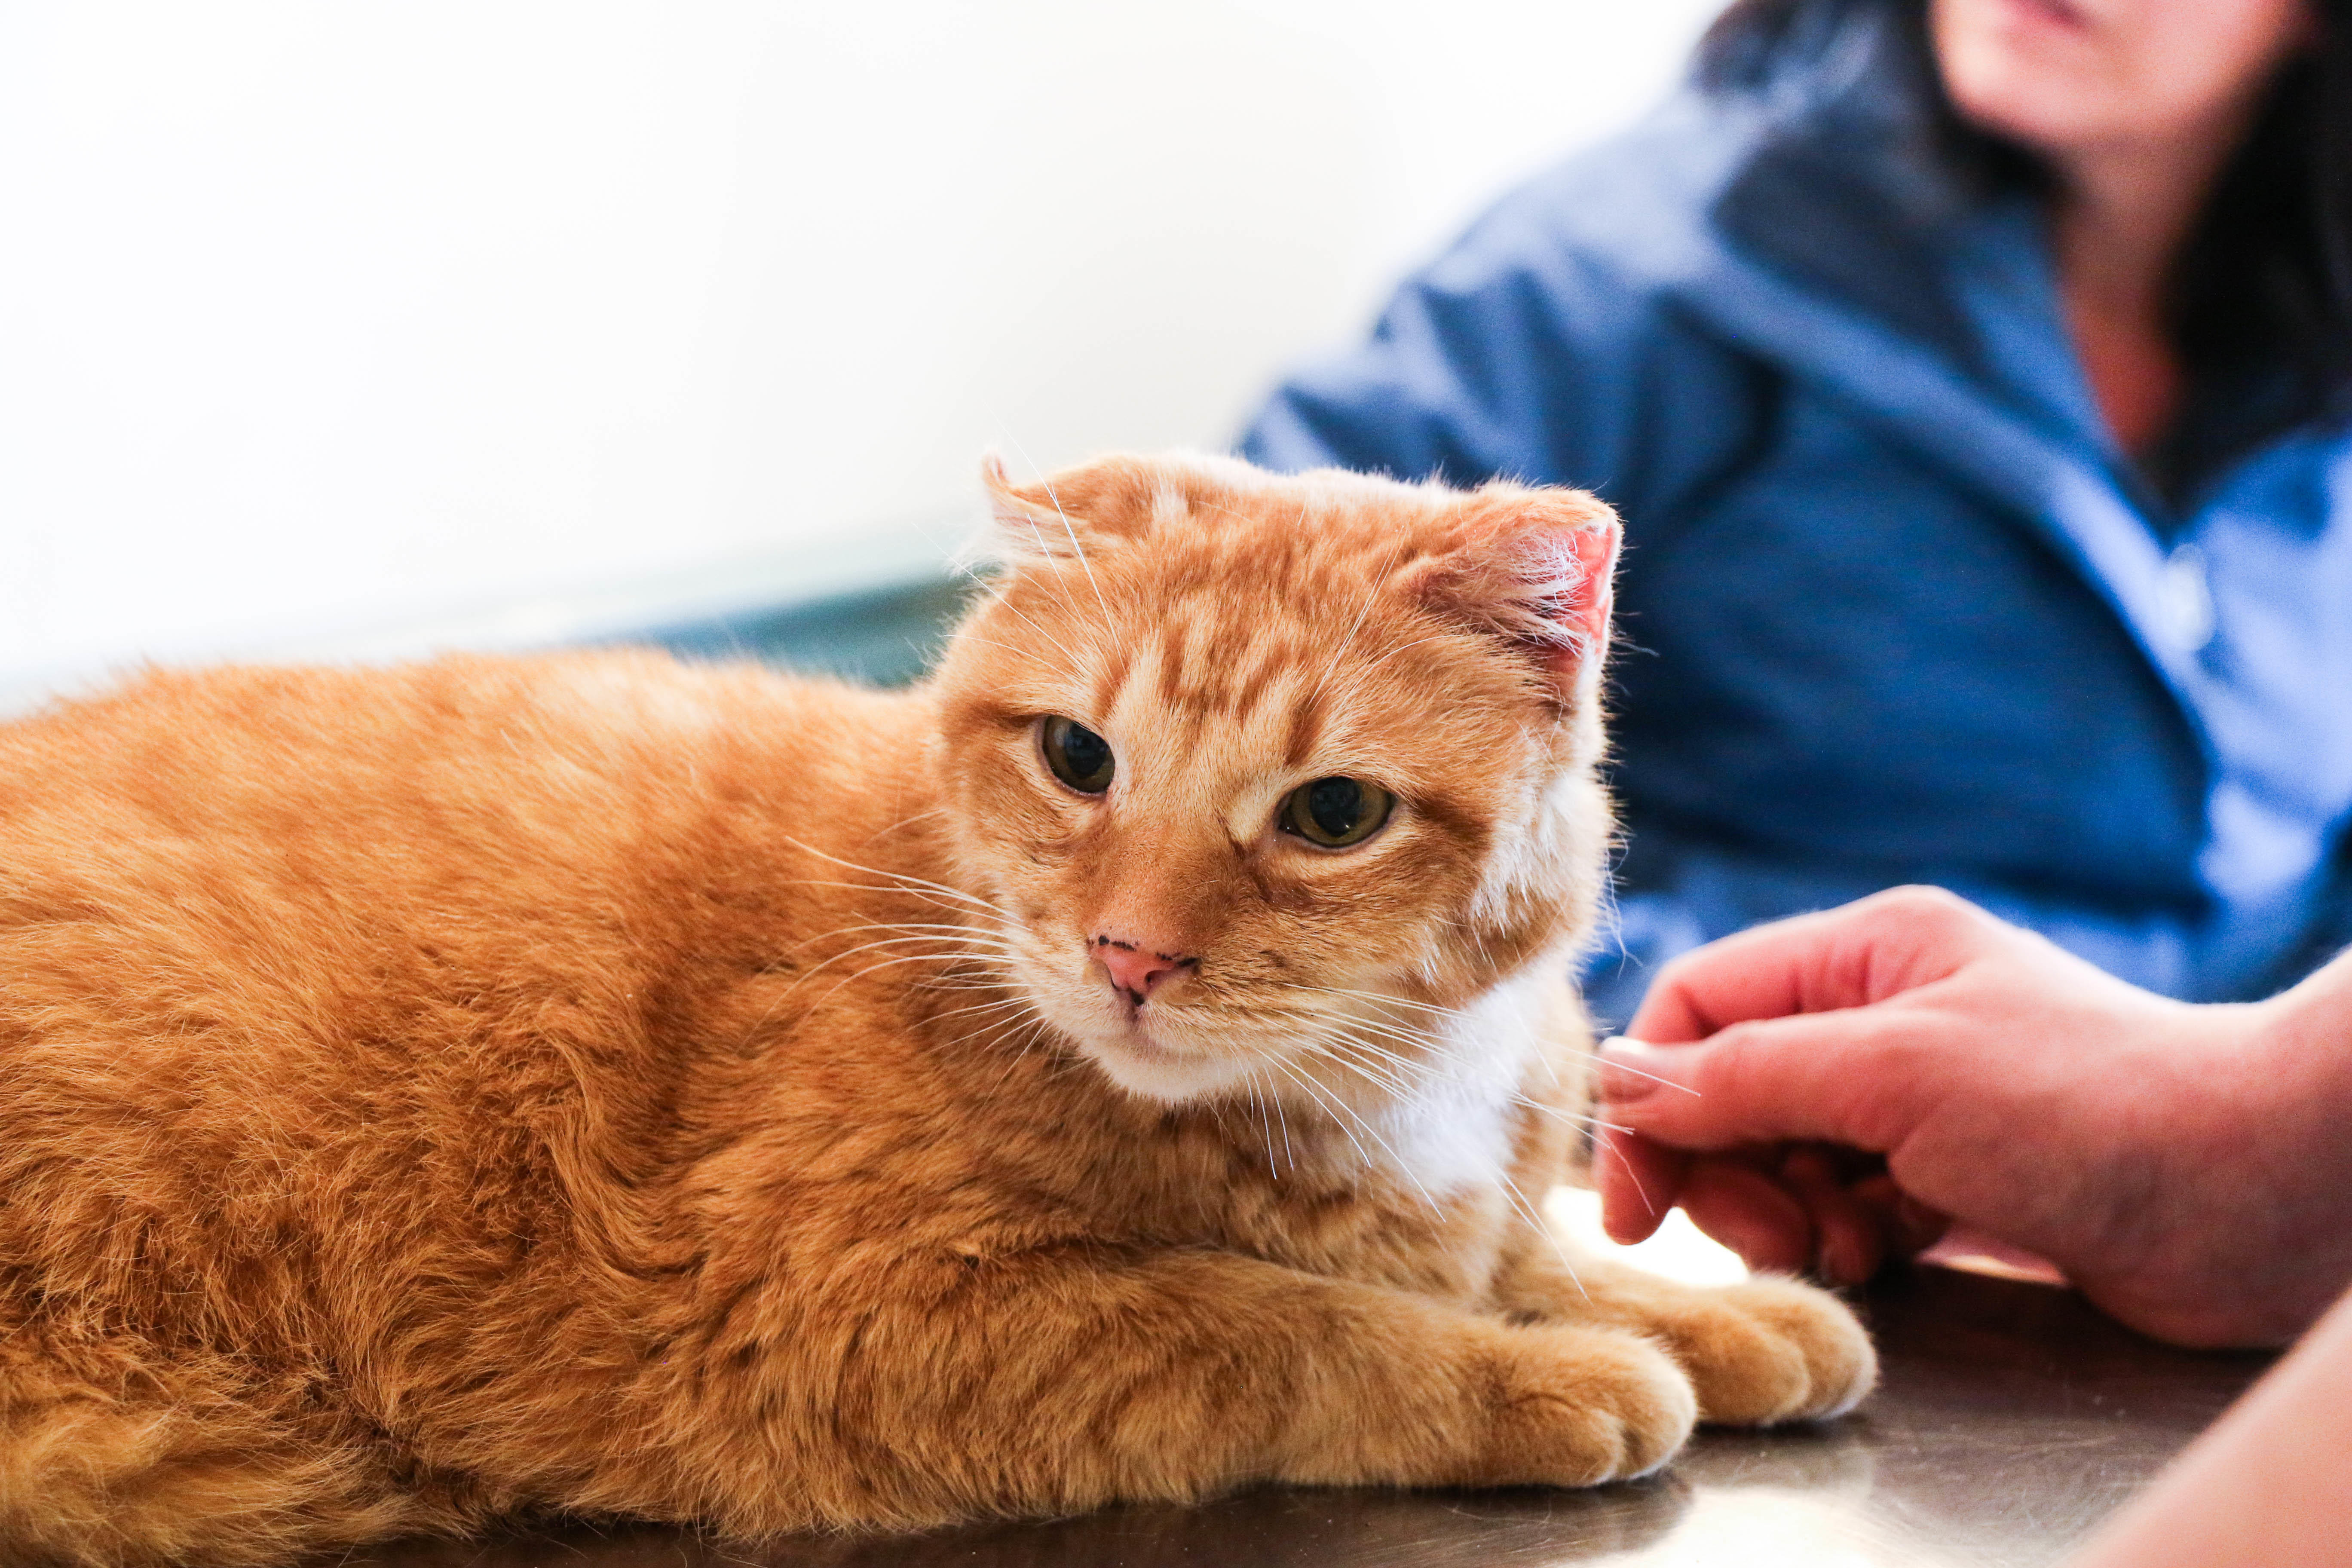 We recommend annual or semi-annual visits for all pets under our care, even if they appear seemingly healthy!